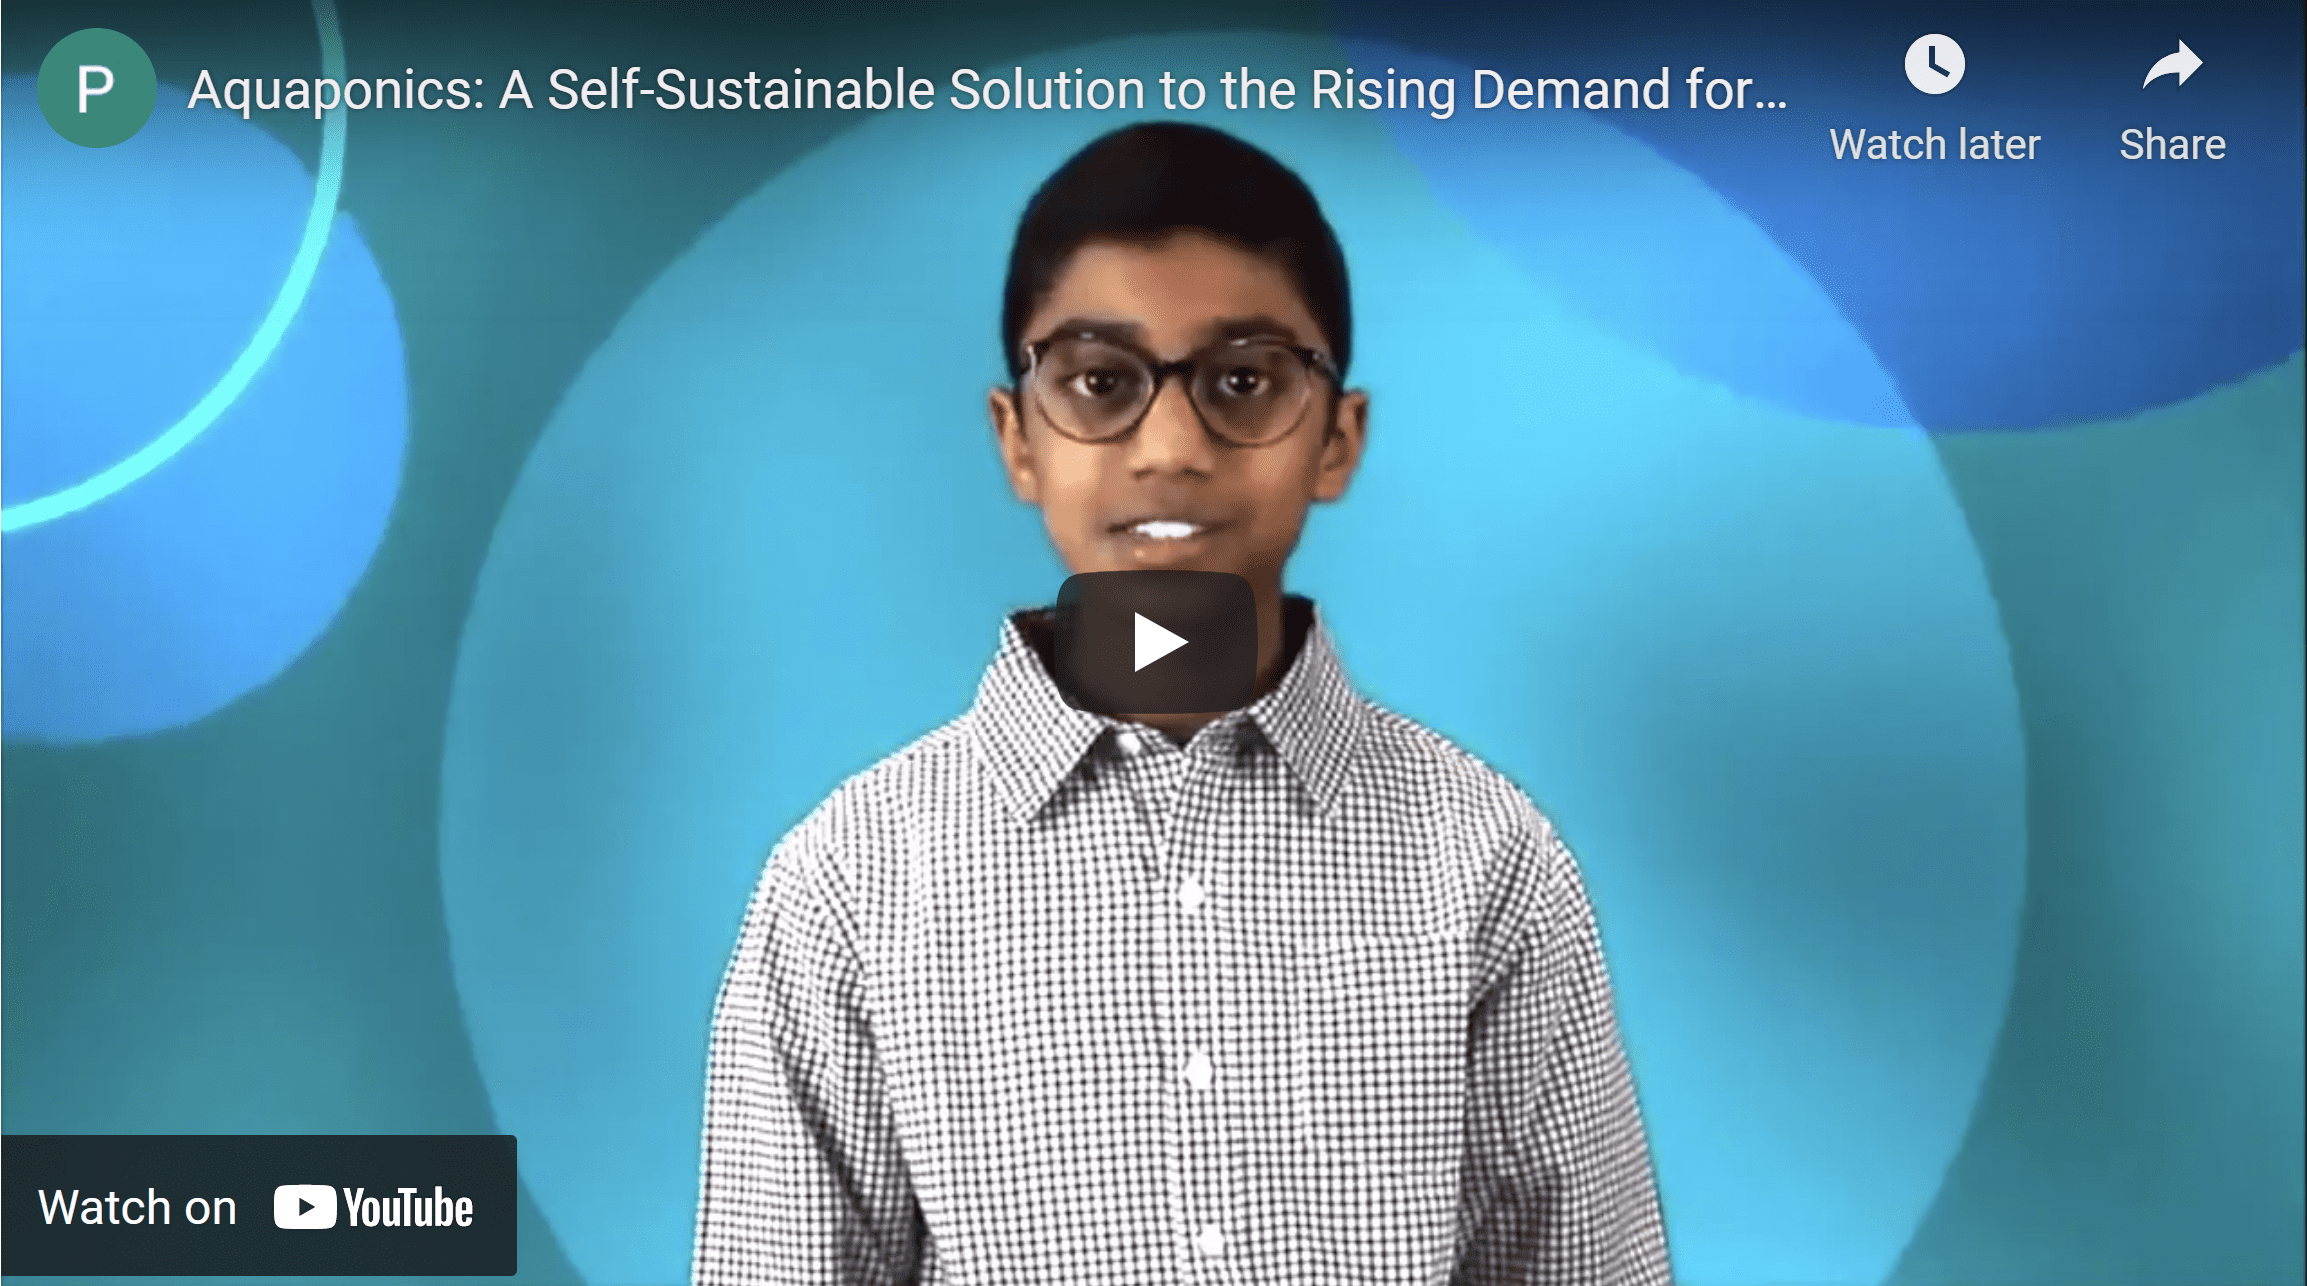 Video screenshot for Aquaponics: A Self-Sustainable Solution to the Rising Demand for Food and Water by Benjamin Kurian, OH